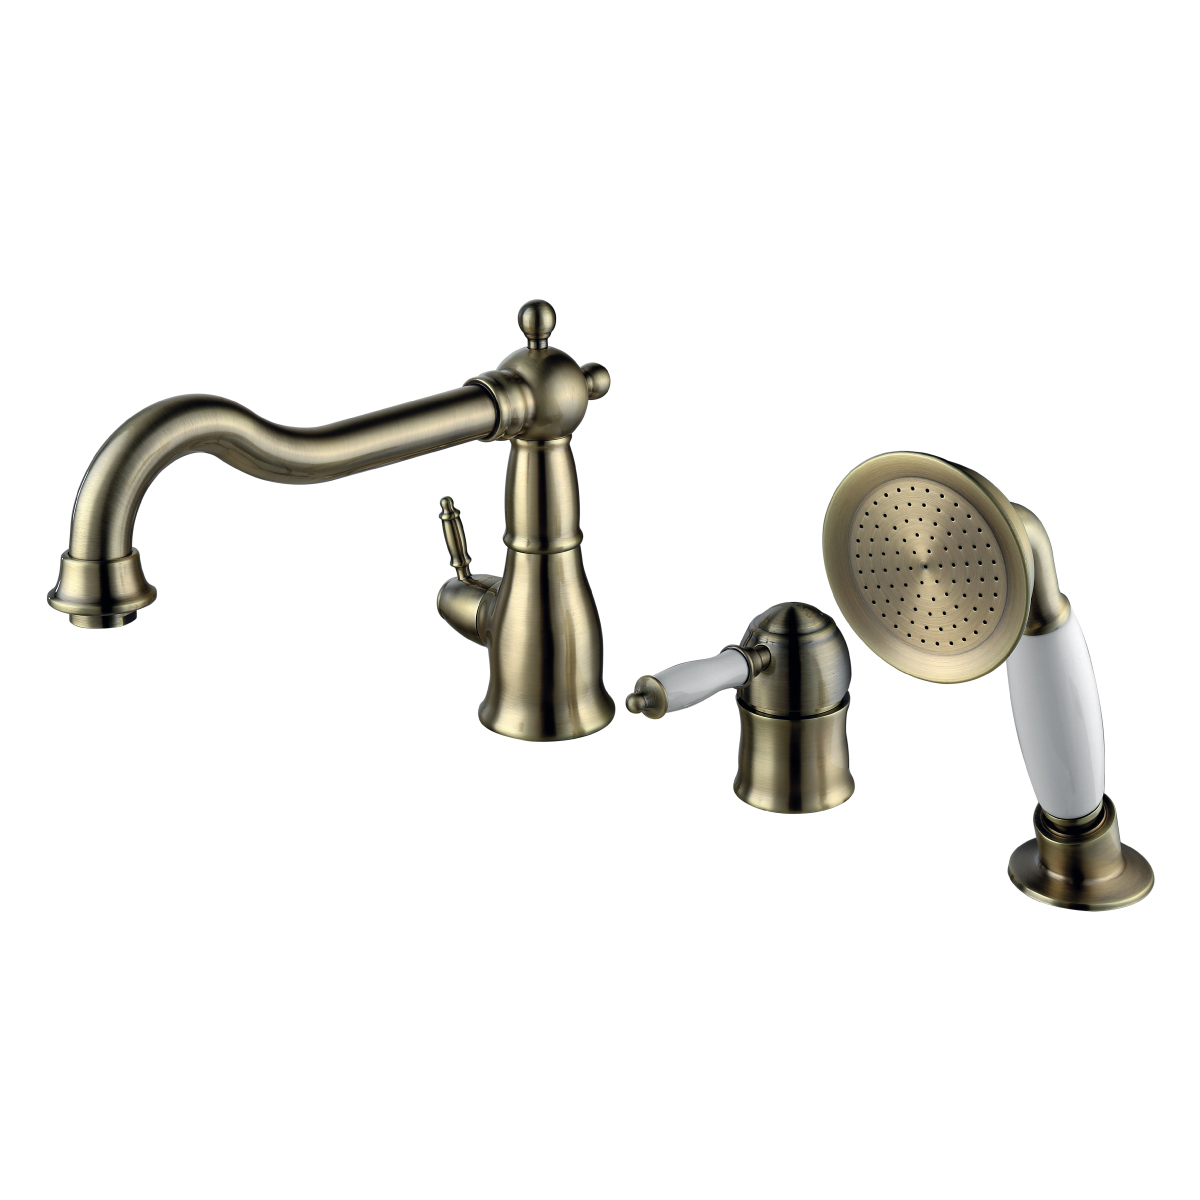 LM4845B 3-hole deck mounted bathtub faucet with swivel spout